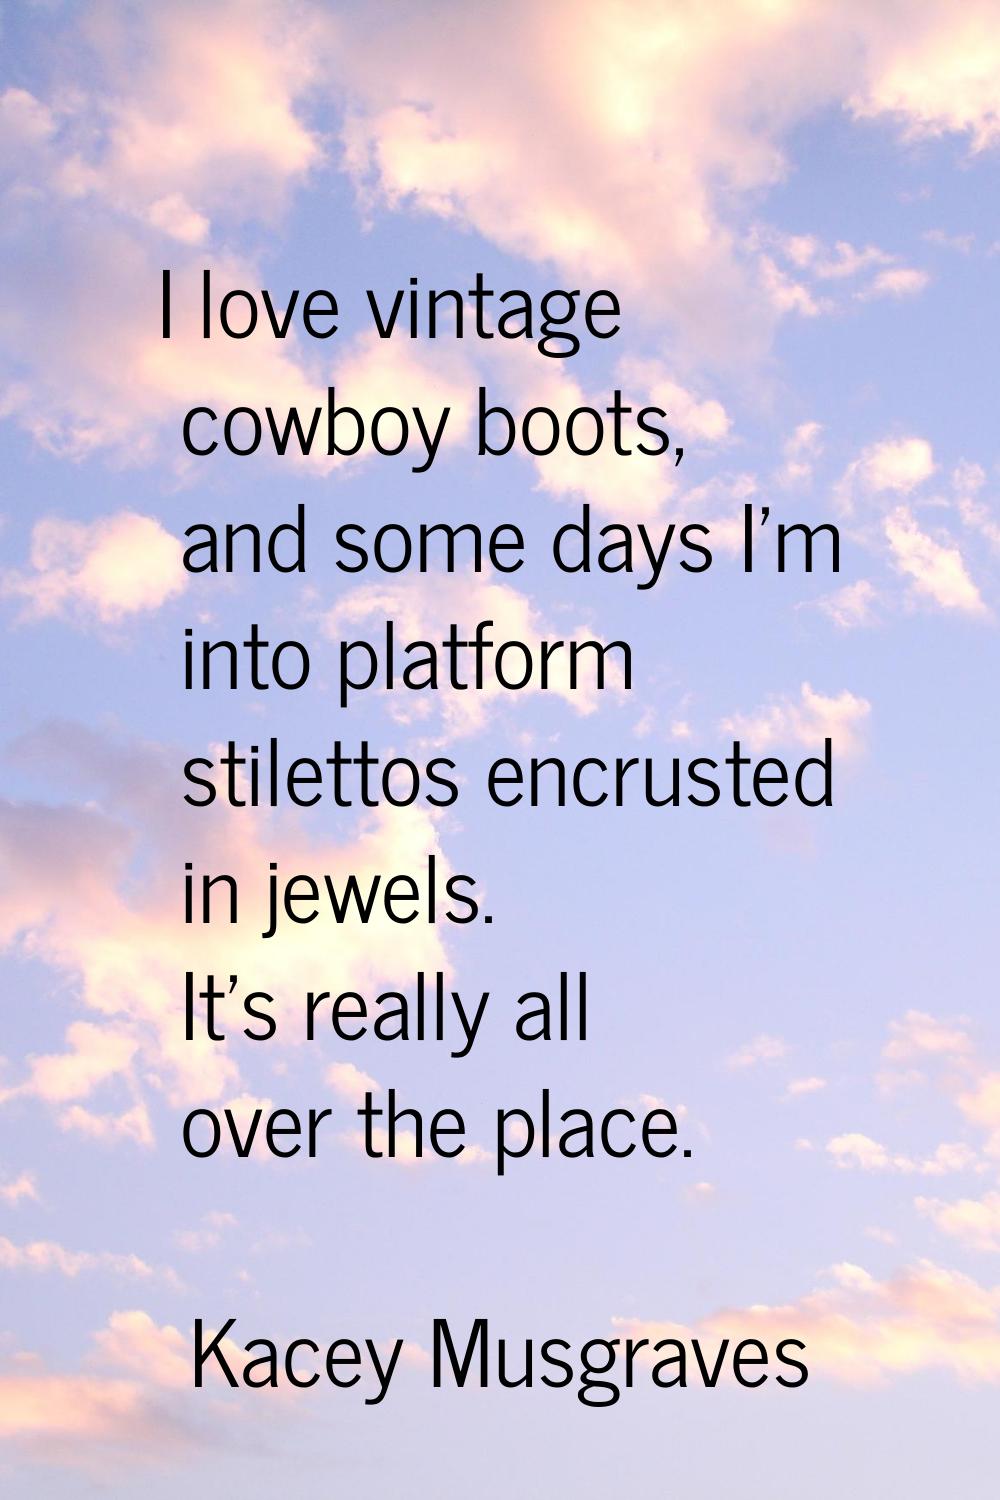 I love vintage cowboy boots, and some days I'm into platform stilettos encrusted in jewels. It's re